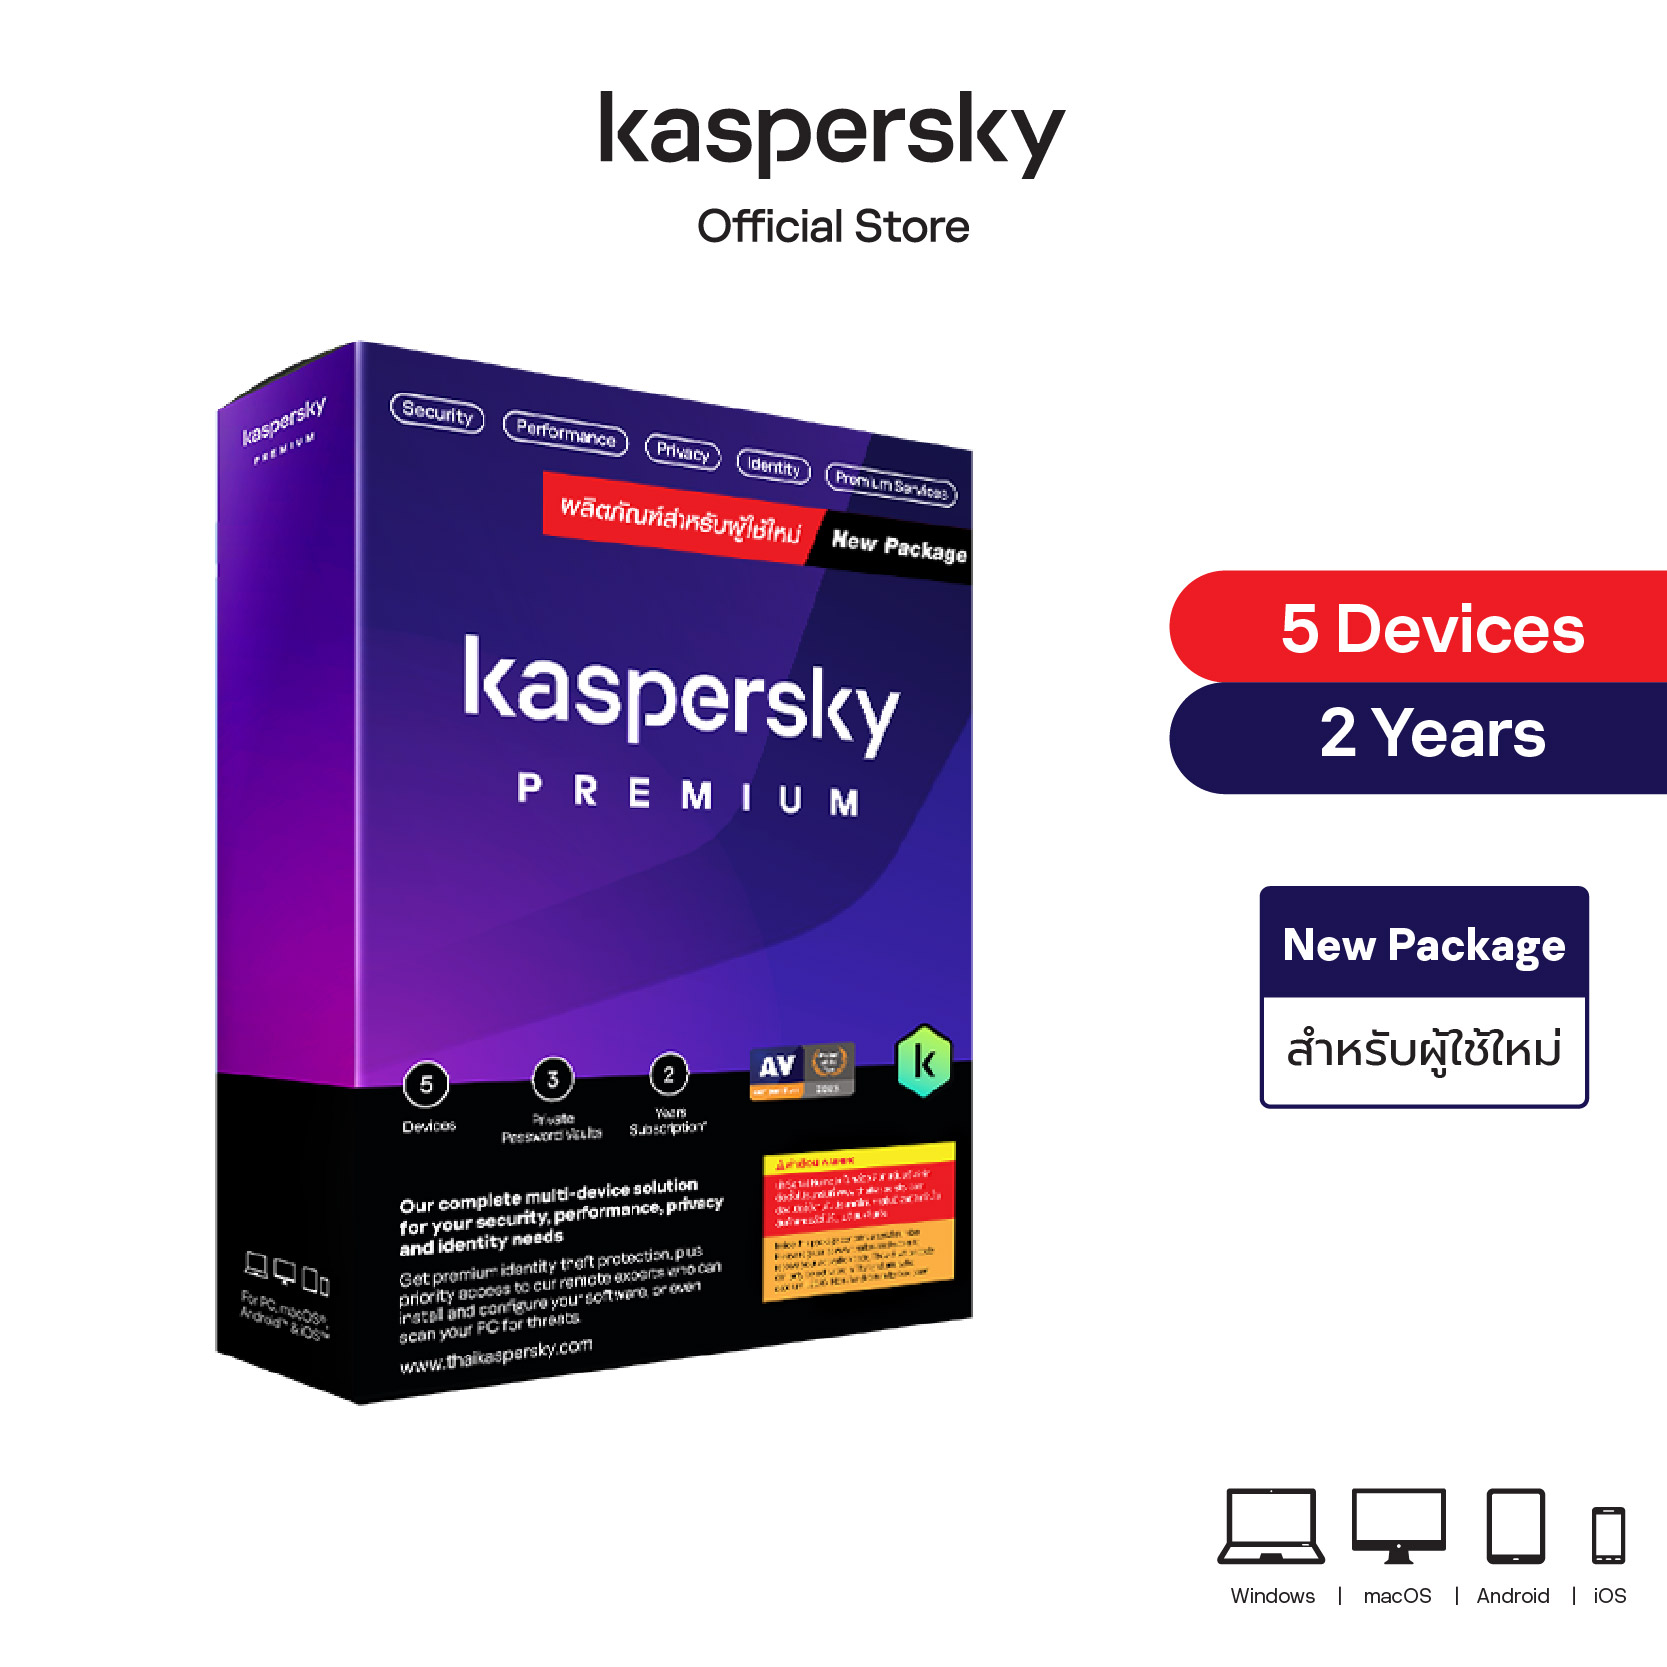 Kaspersky Premium 5 Devices 2 Year